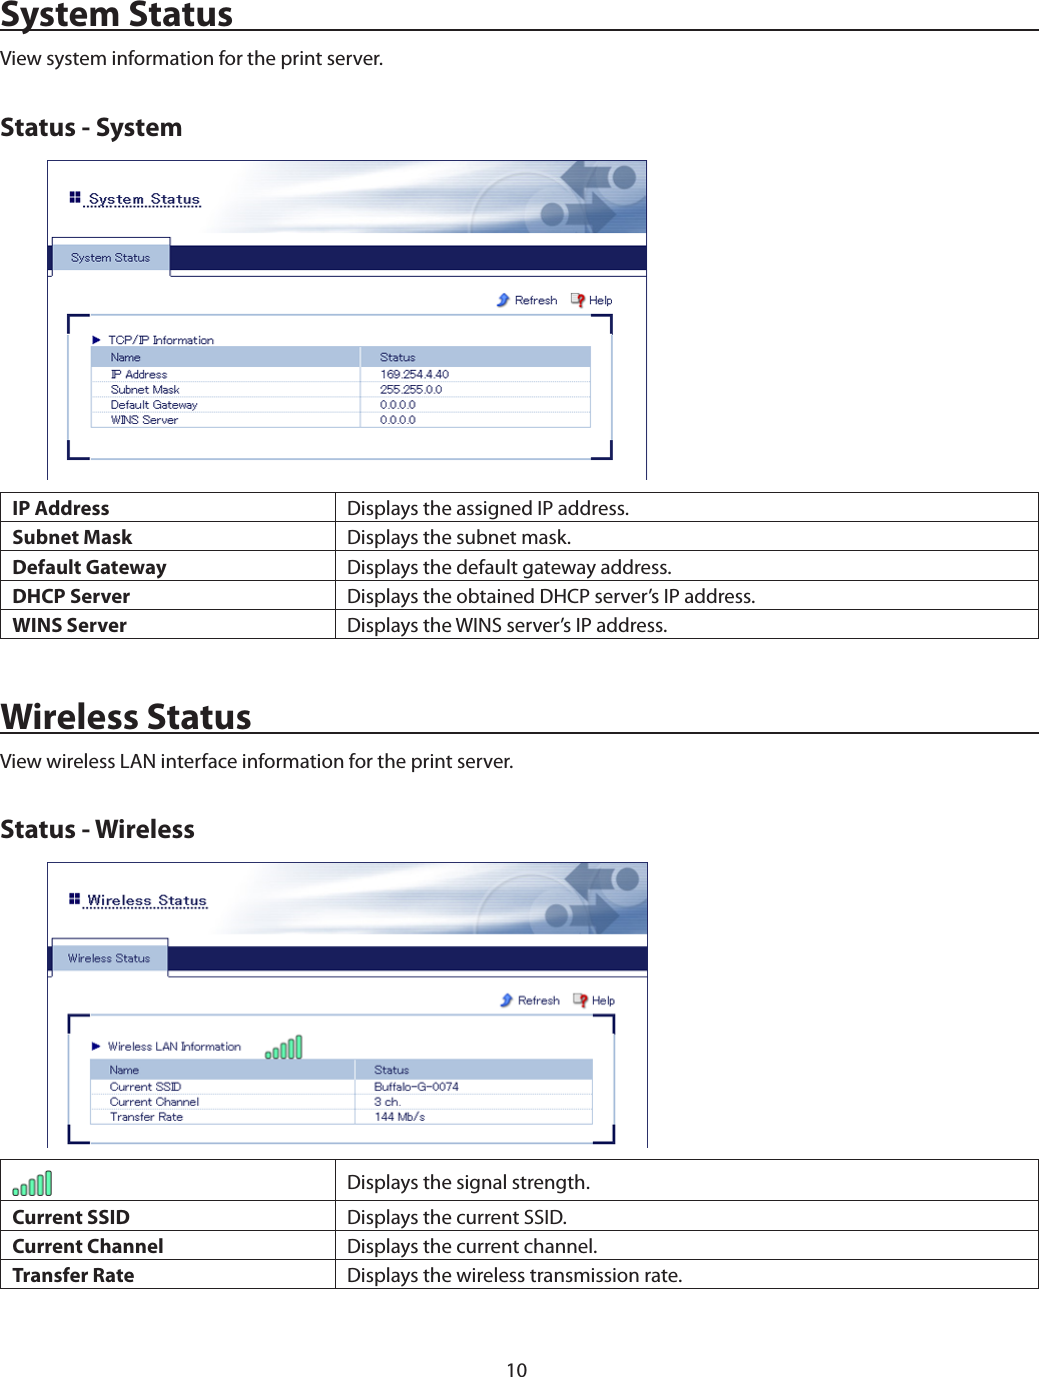 10System StatusView system information for the print server.Status - SystemIP Address Displays the assigned IP address.Subnet Mask Displays the subnet mask.Default Gateway Displays the default gateway address.DHCP Server Displays the obtained DHCP server’s IP address.WINS Server Displays the WINS server’s IP address.Wireless StatusView wireless LAN interface information for the print server.Status - WirelessDisplays the signal strength.Current SSID Displays the current SSID.Current Channel Displays the current channel.Transfer Rate Displays the wireless transmission rate.